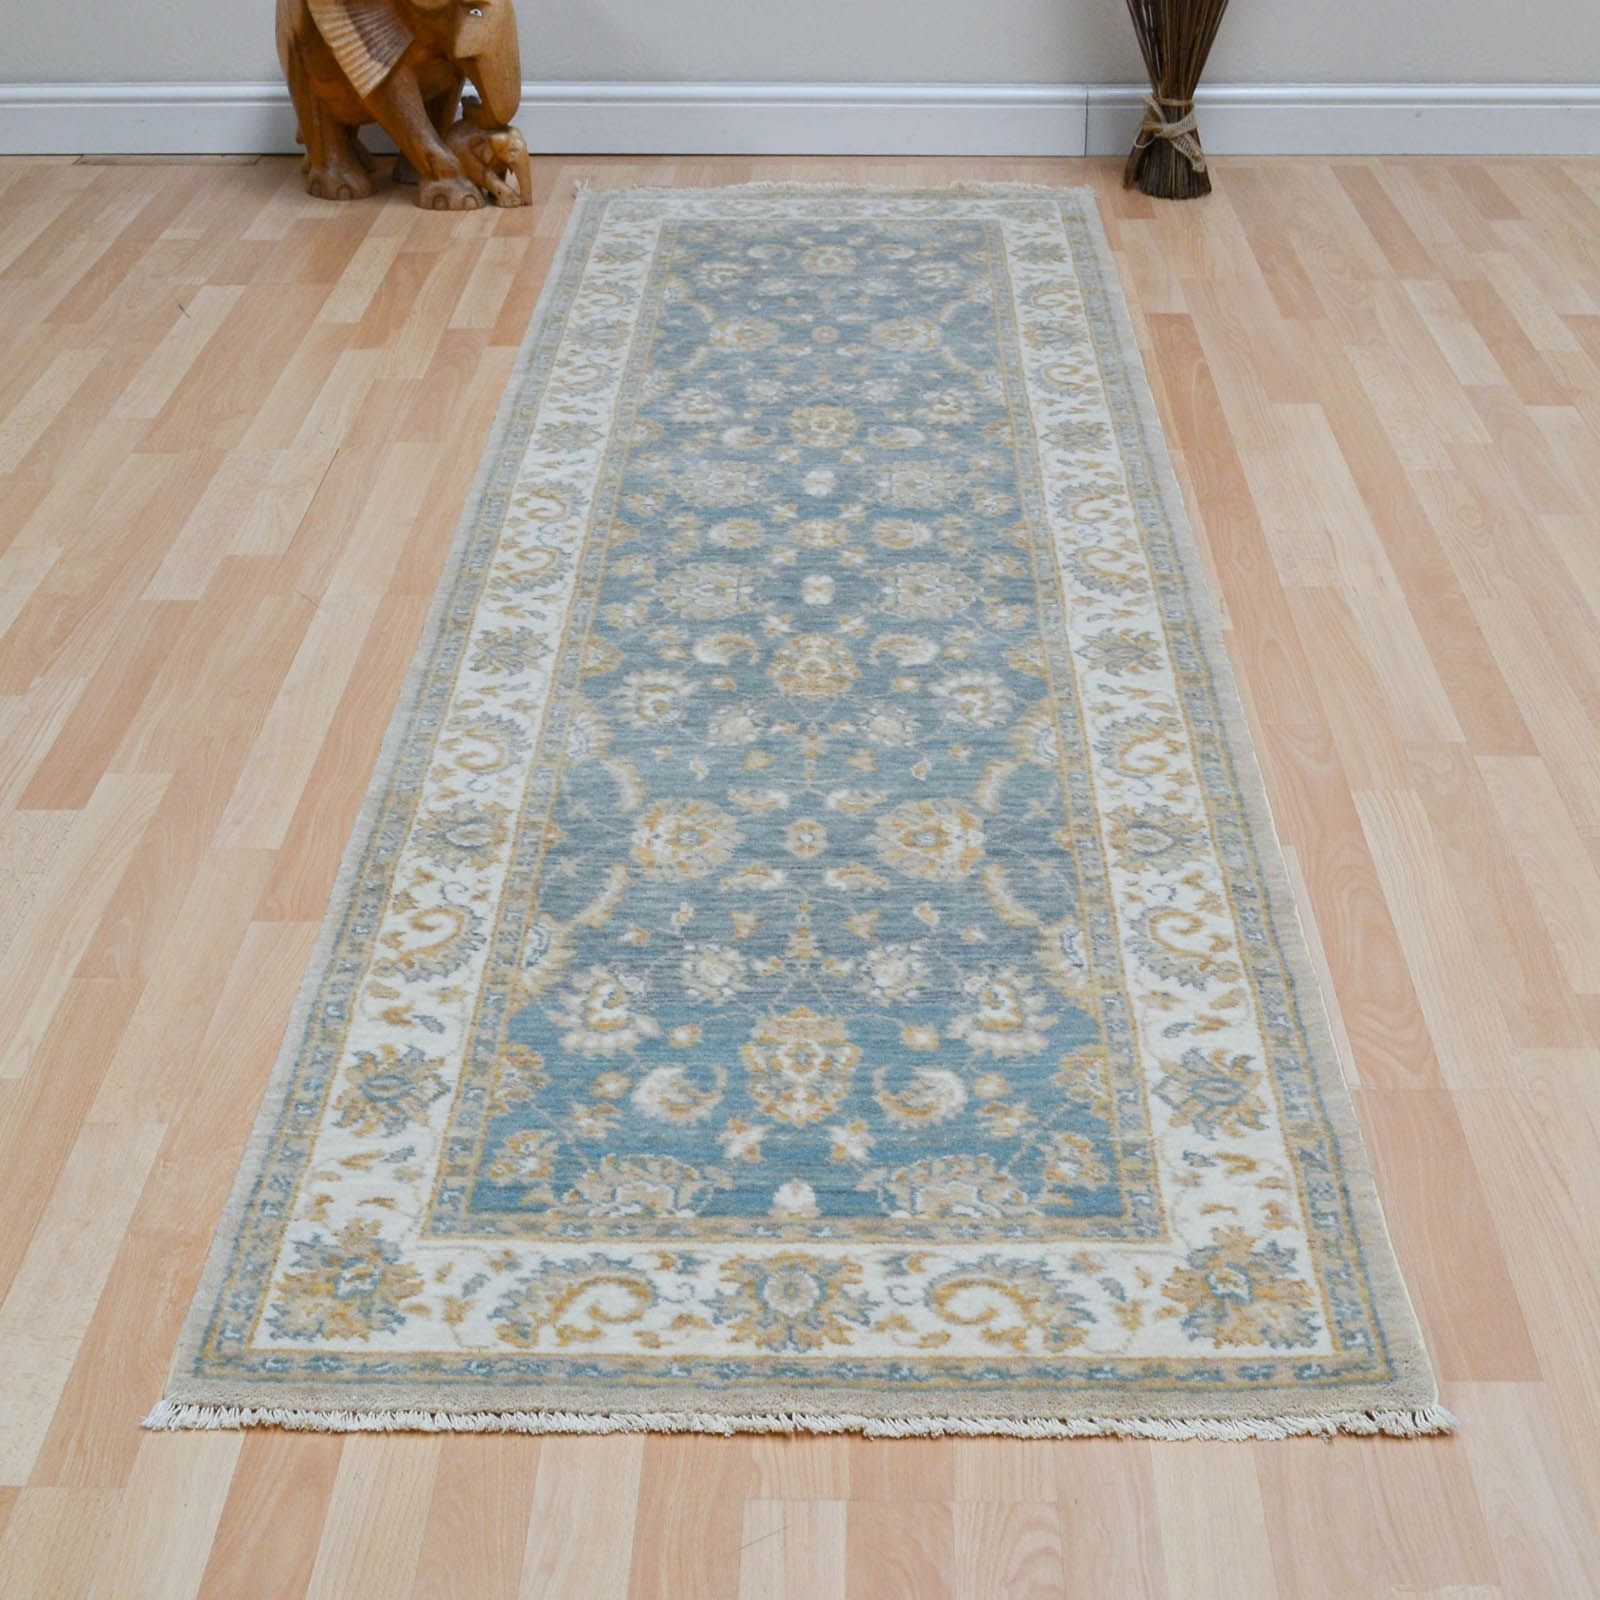 Ripple Blue Kids Floor Rugs Free Shipping Australia Wide Also Pertaining To Blue Rug Runners For Hallways (Photo 2 of 20)